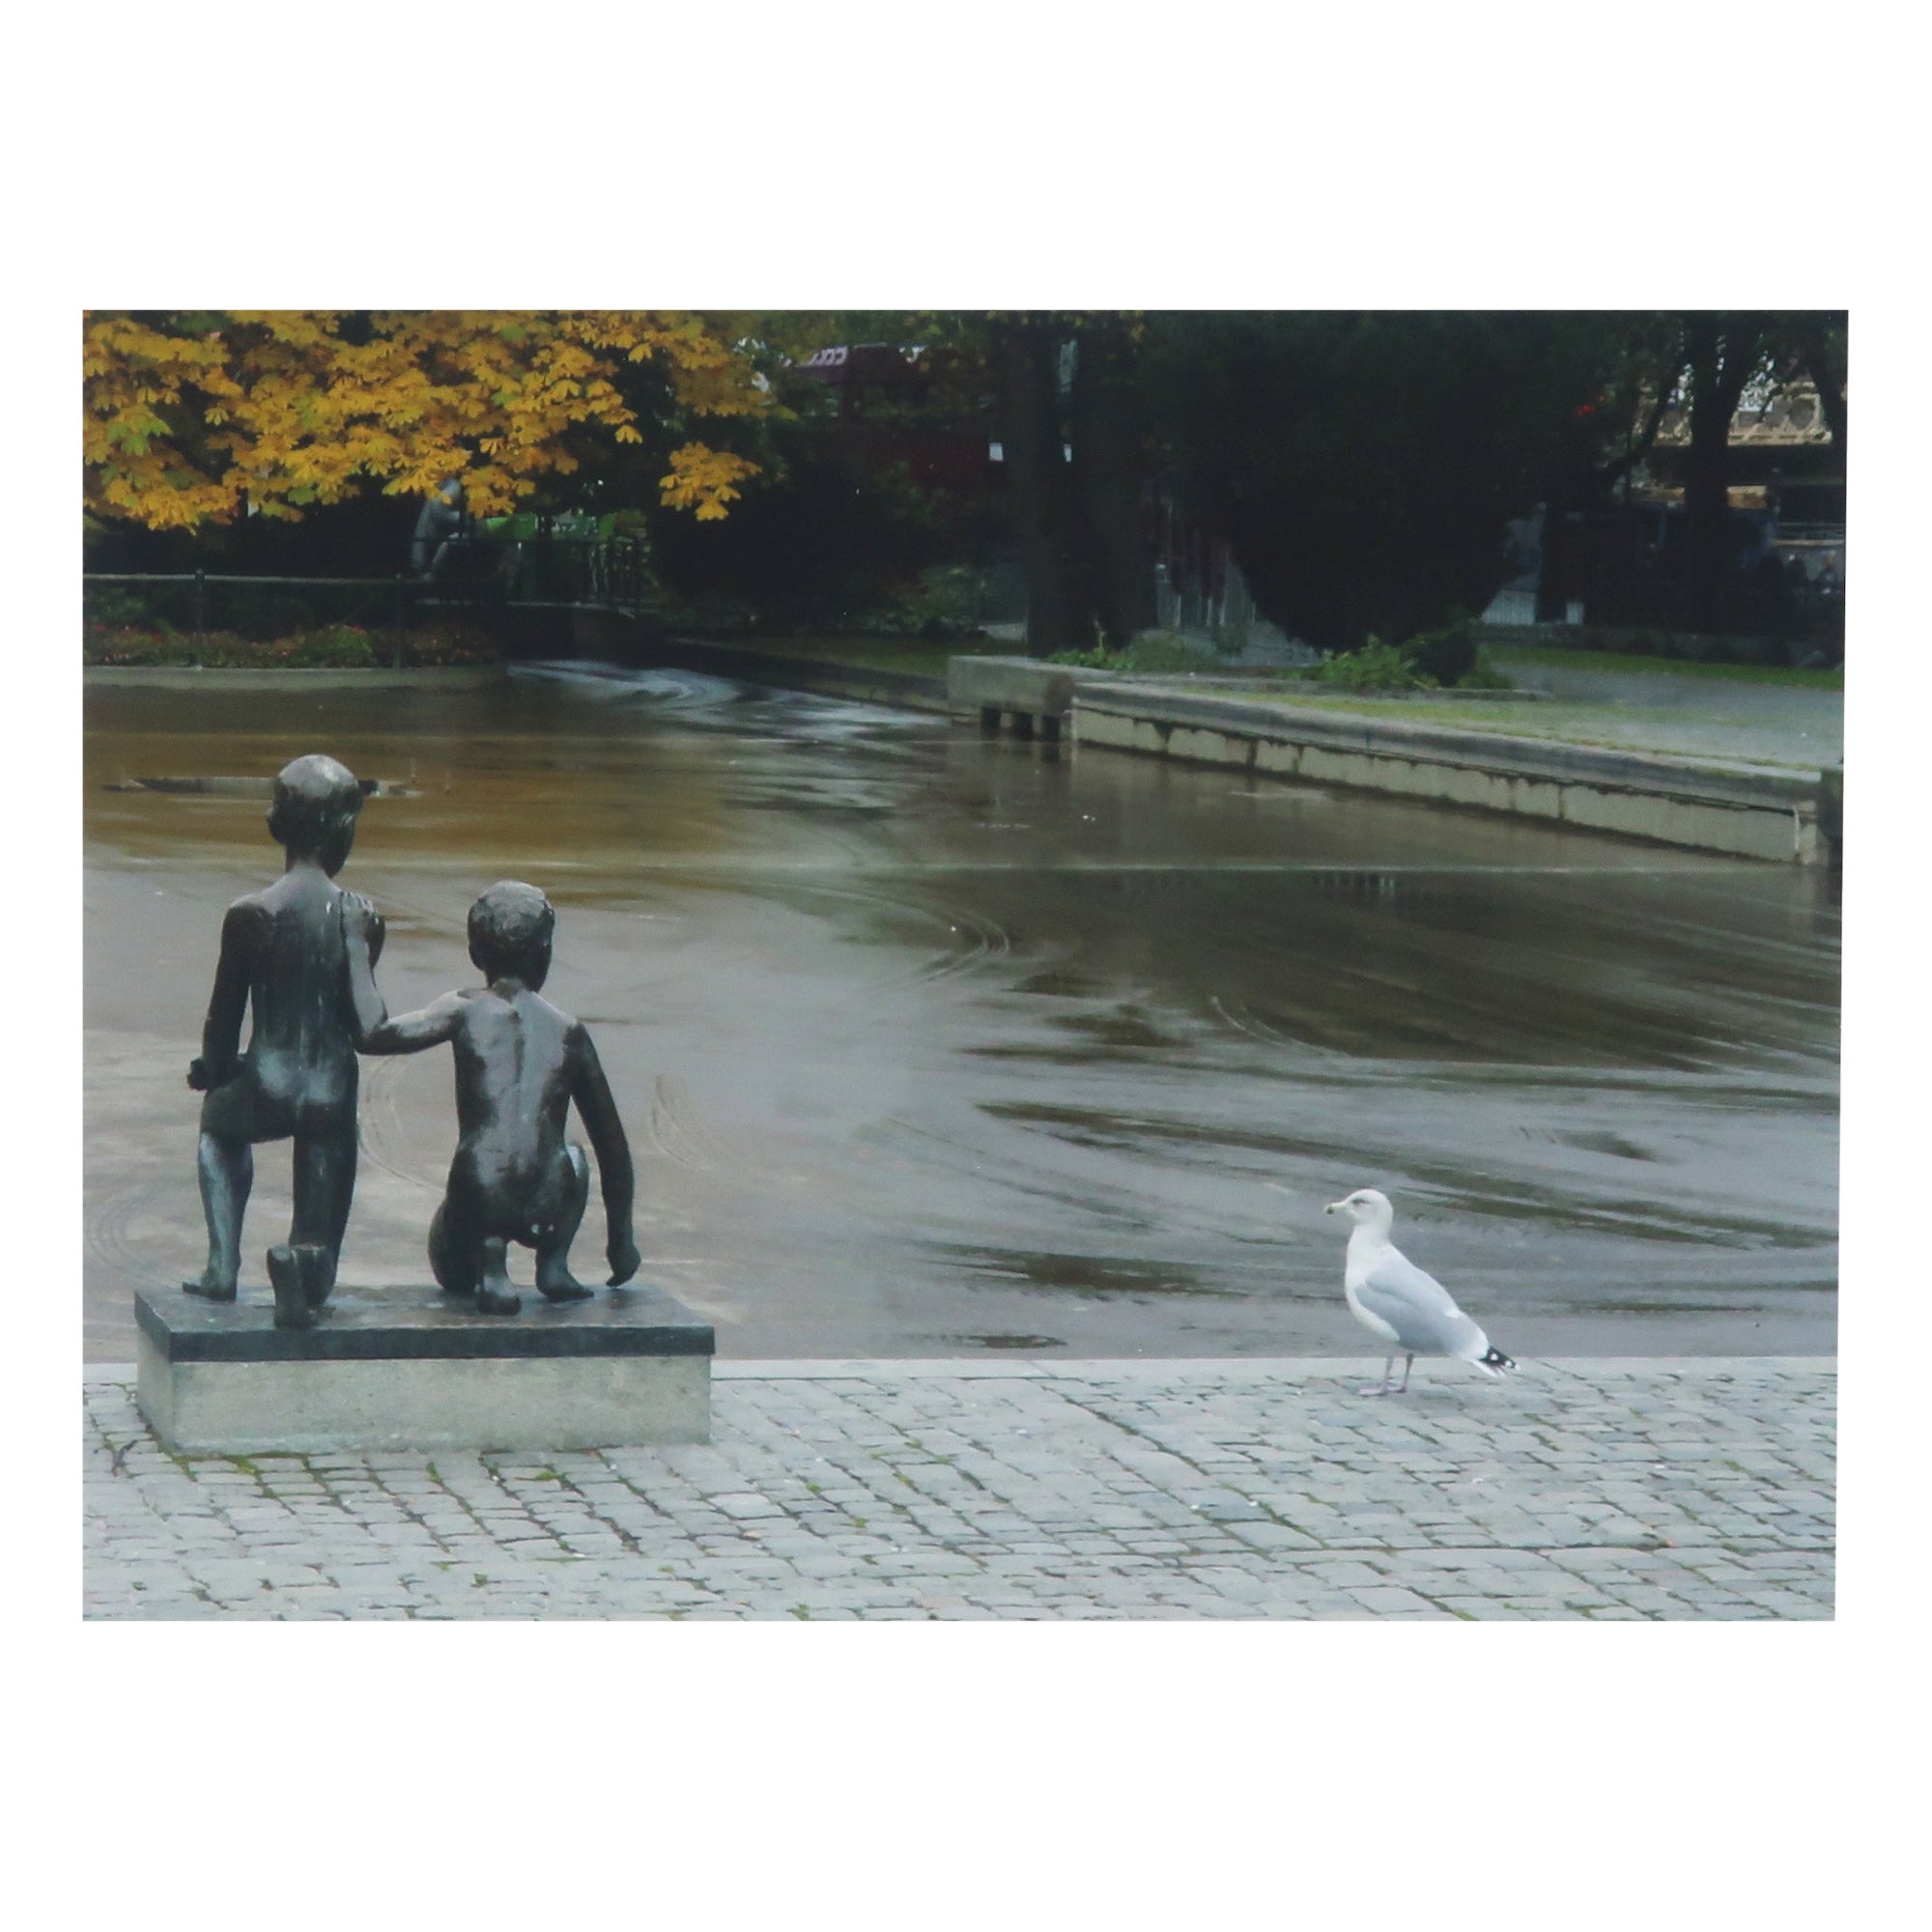 David Claerbout "Oslo Meeum" Print (2003-2007) For Sale